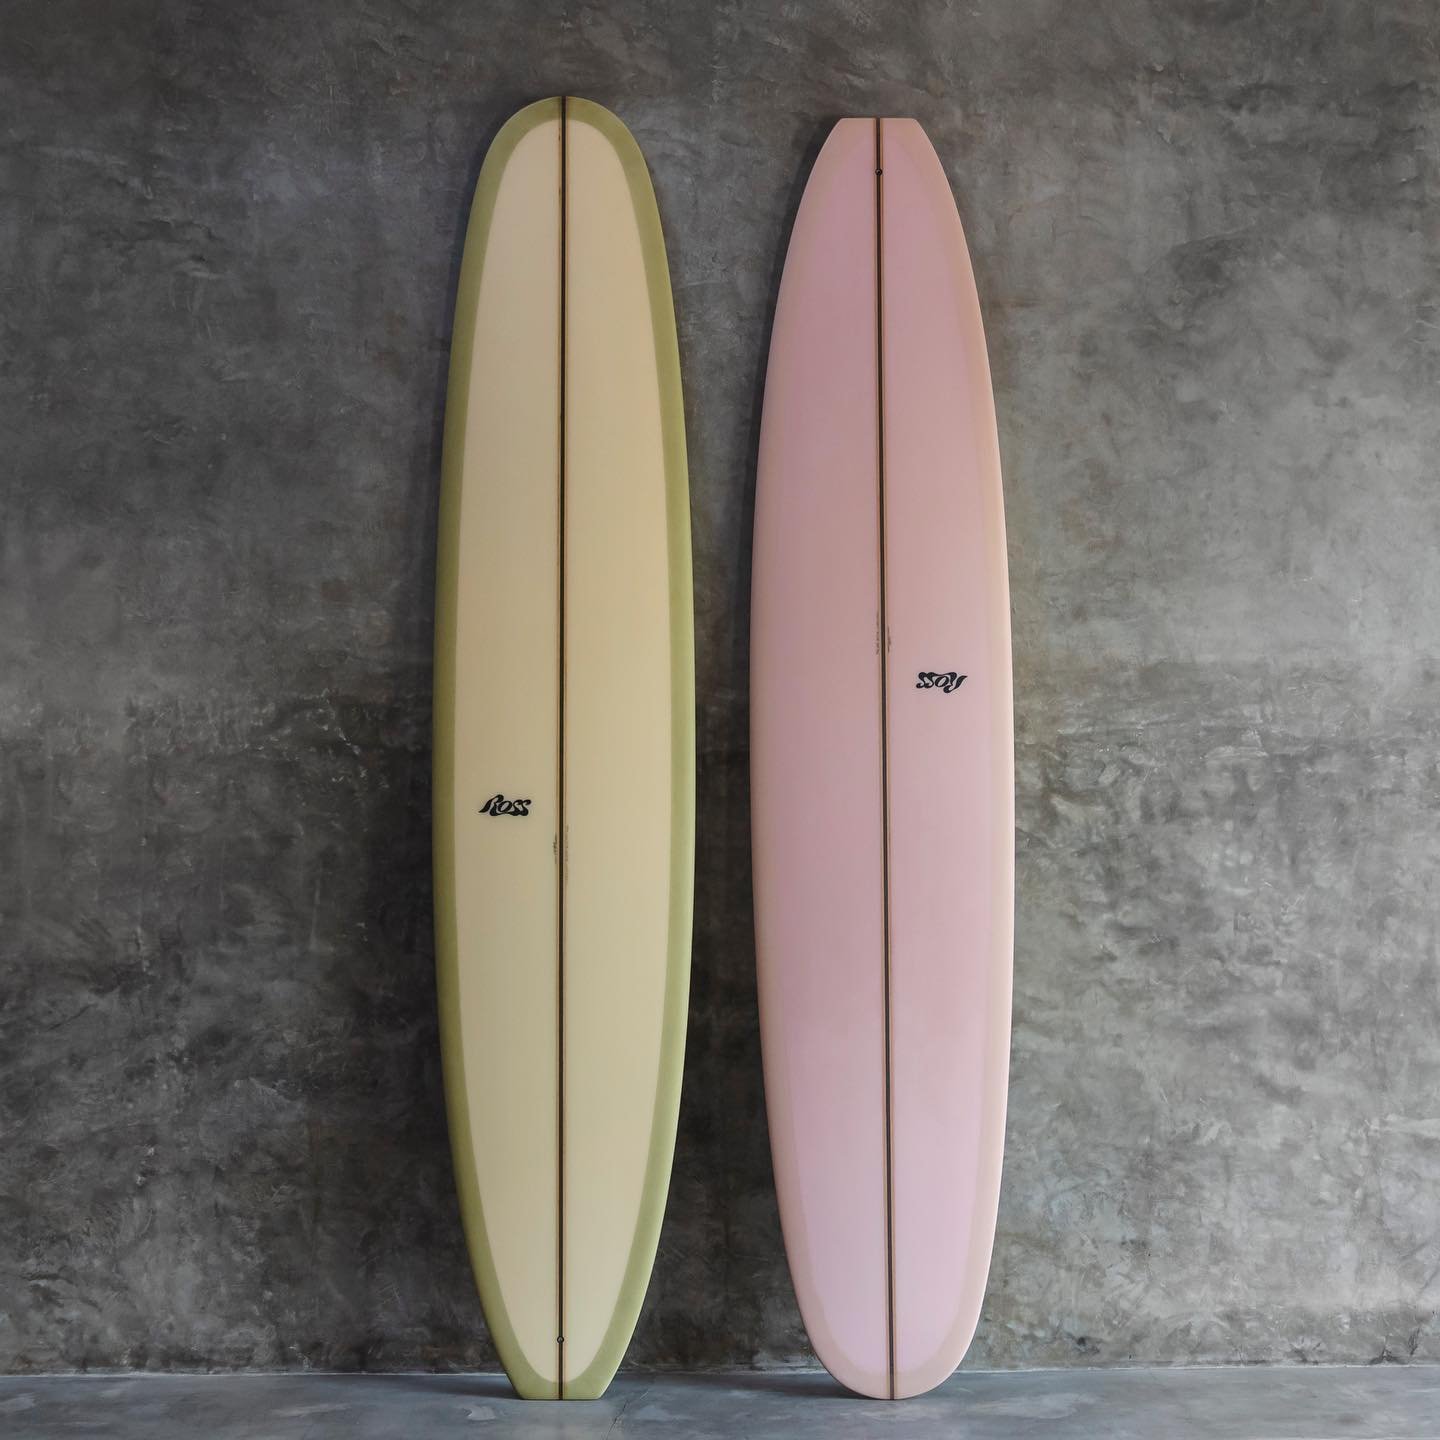 Two Resolutions fresh from the shaping bay and heading to their new owners.